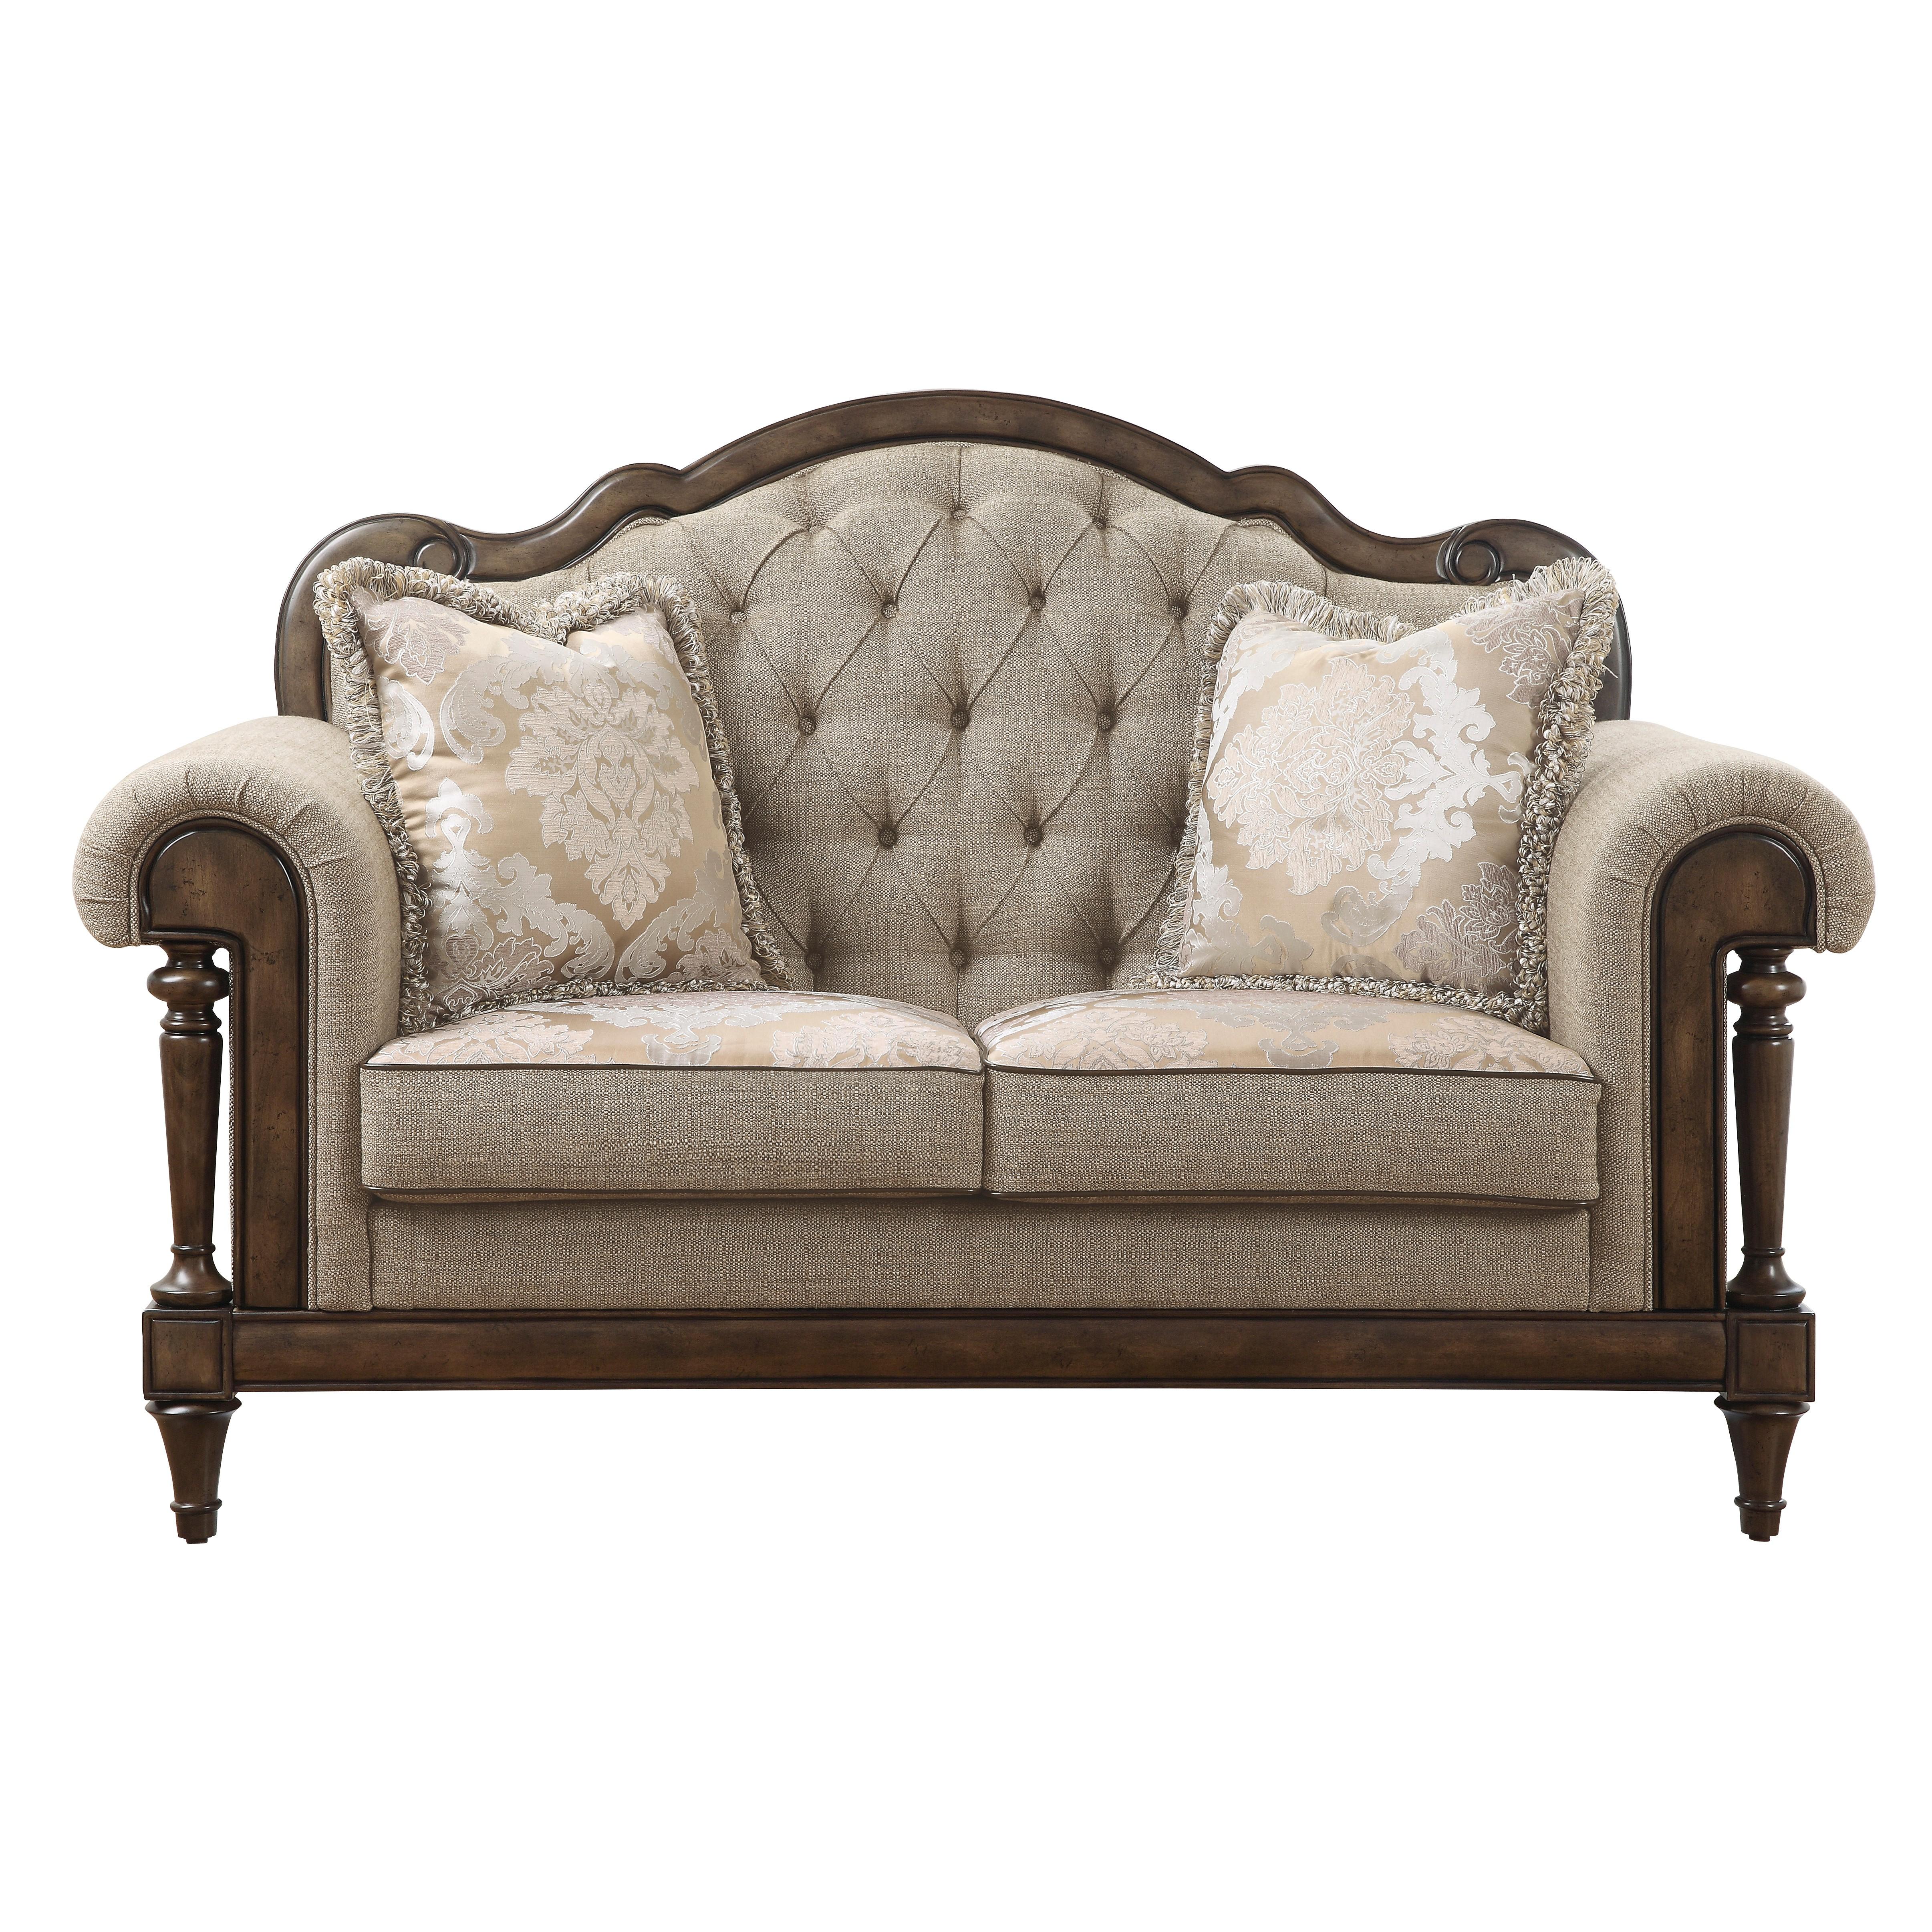 Traditional Loveseat 16829-2 Heath Court 16829-2 in Light Brown 